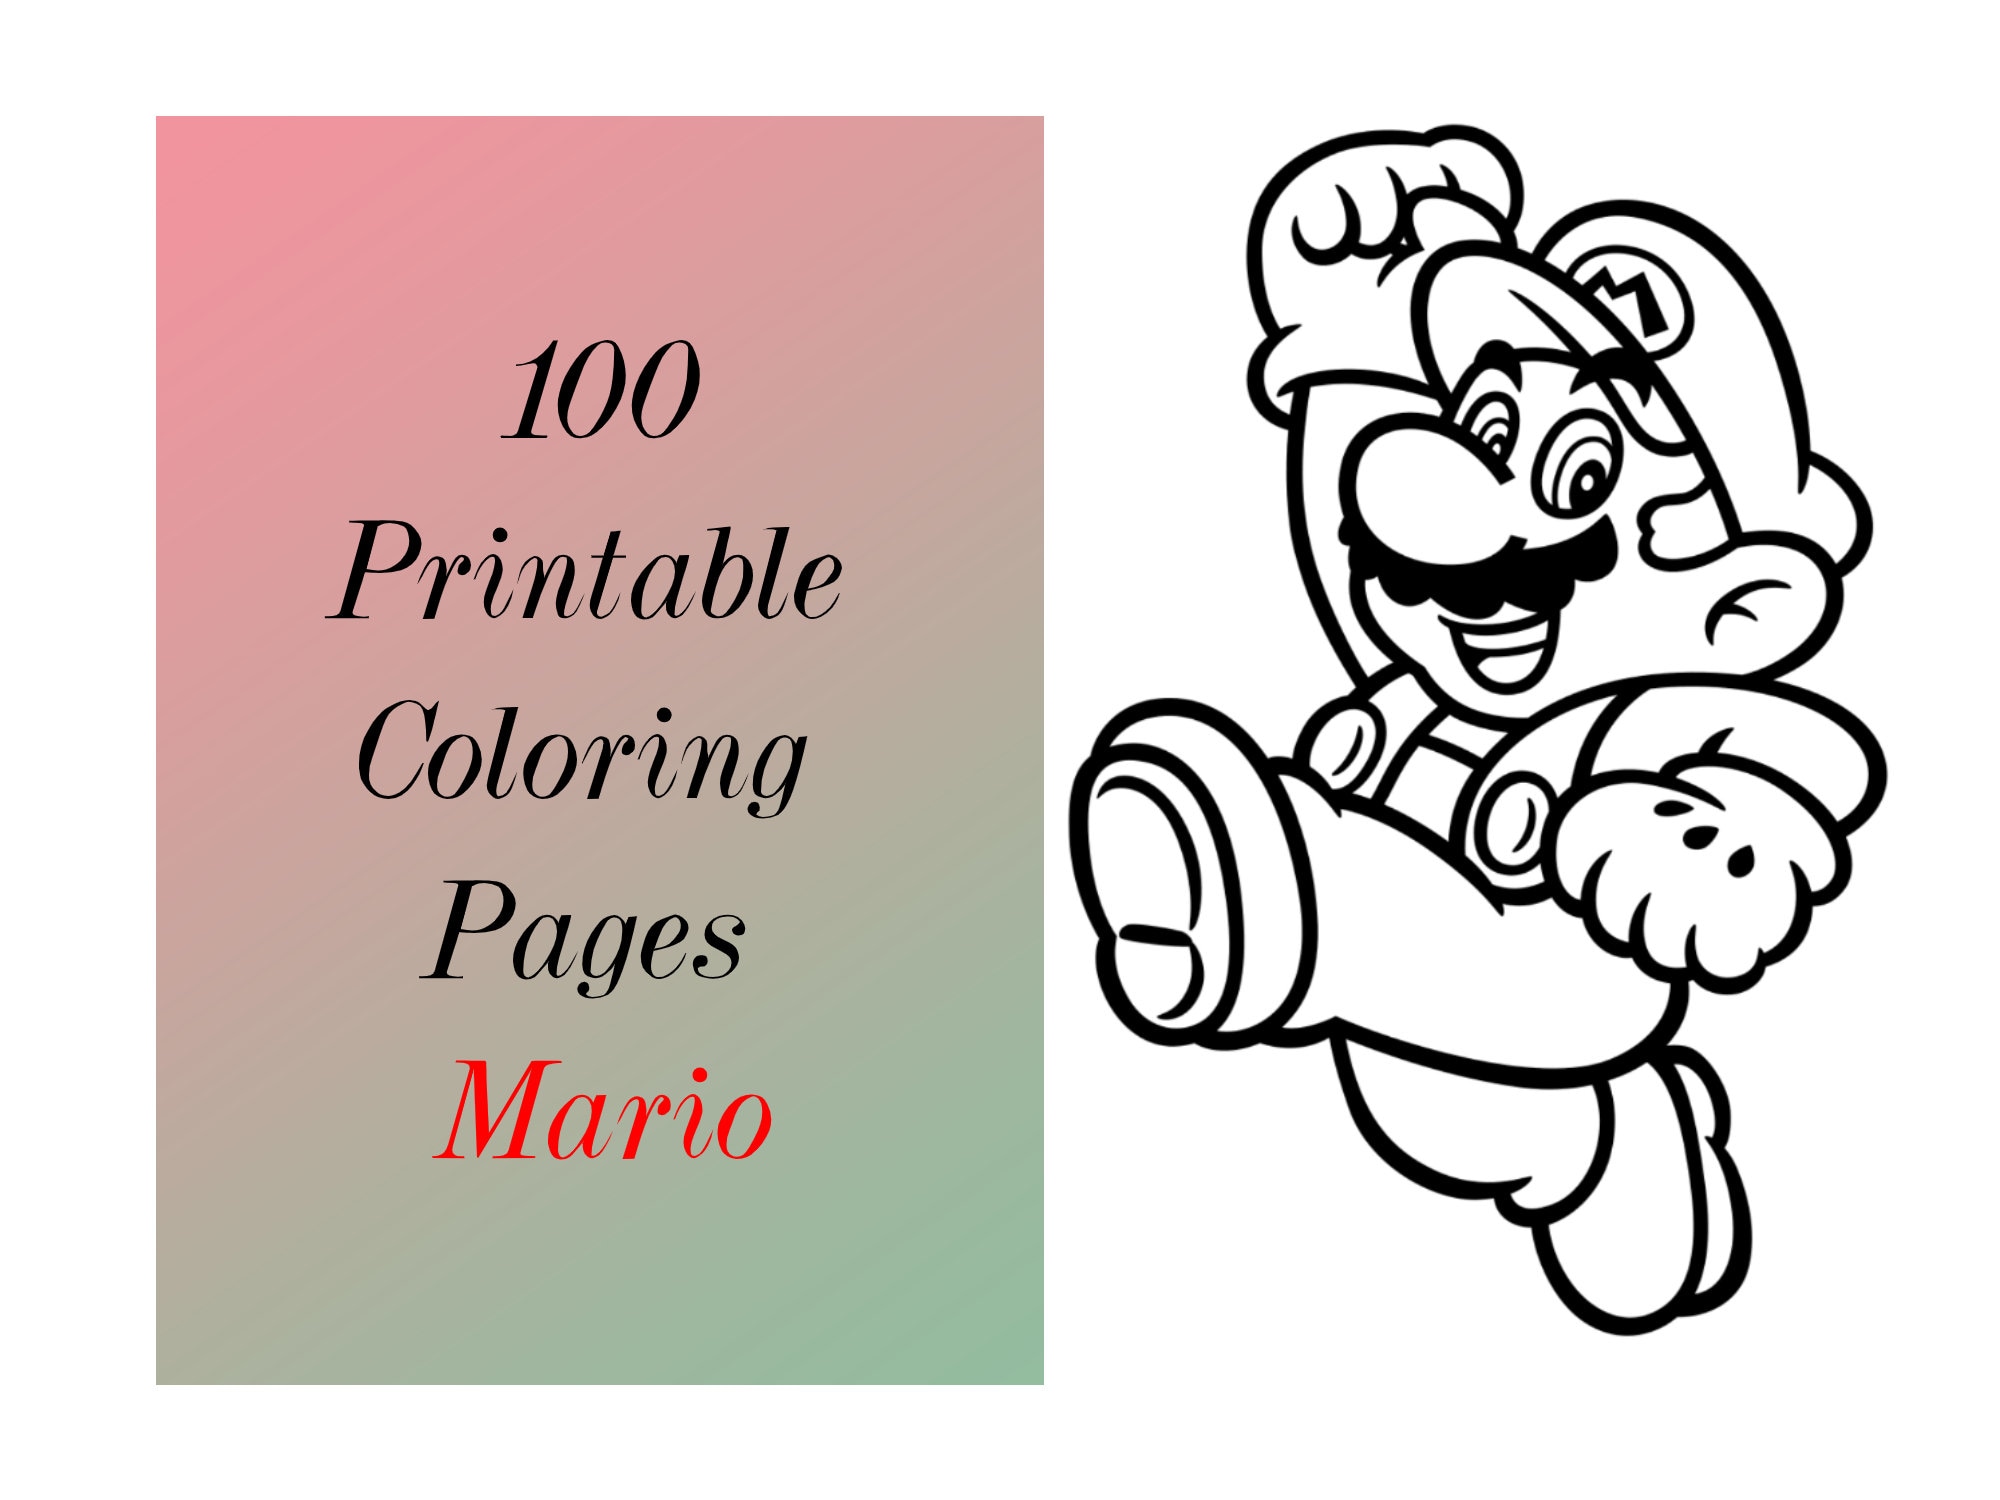 Coloring pages pdf printable cute easy color sheets to print for kids girls boys digital coloring book activity at home instant download